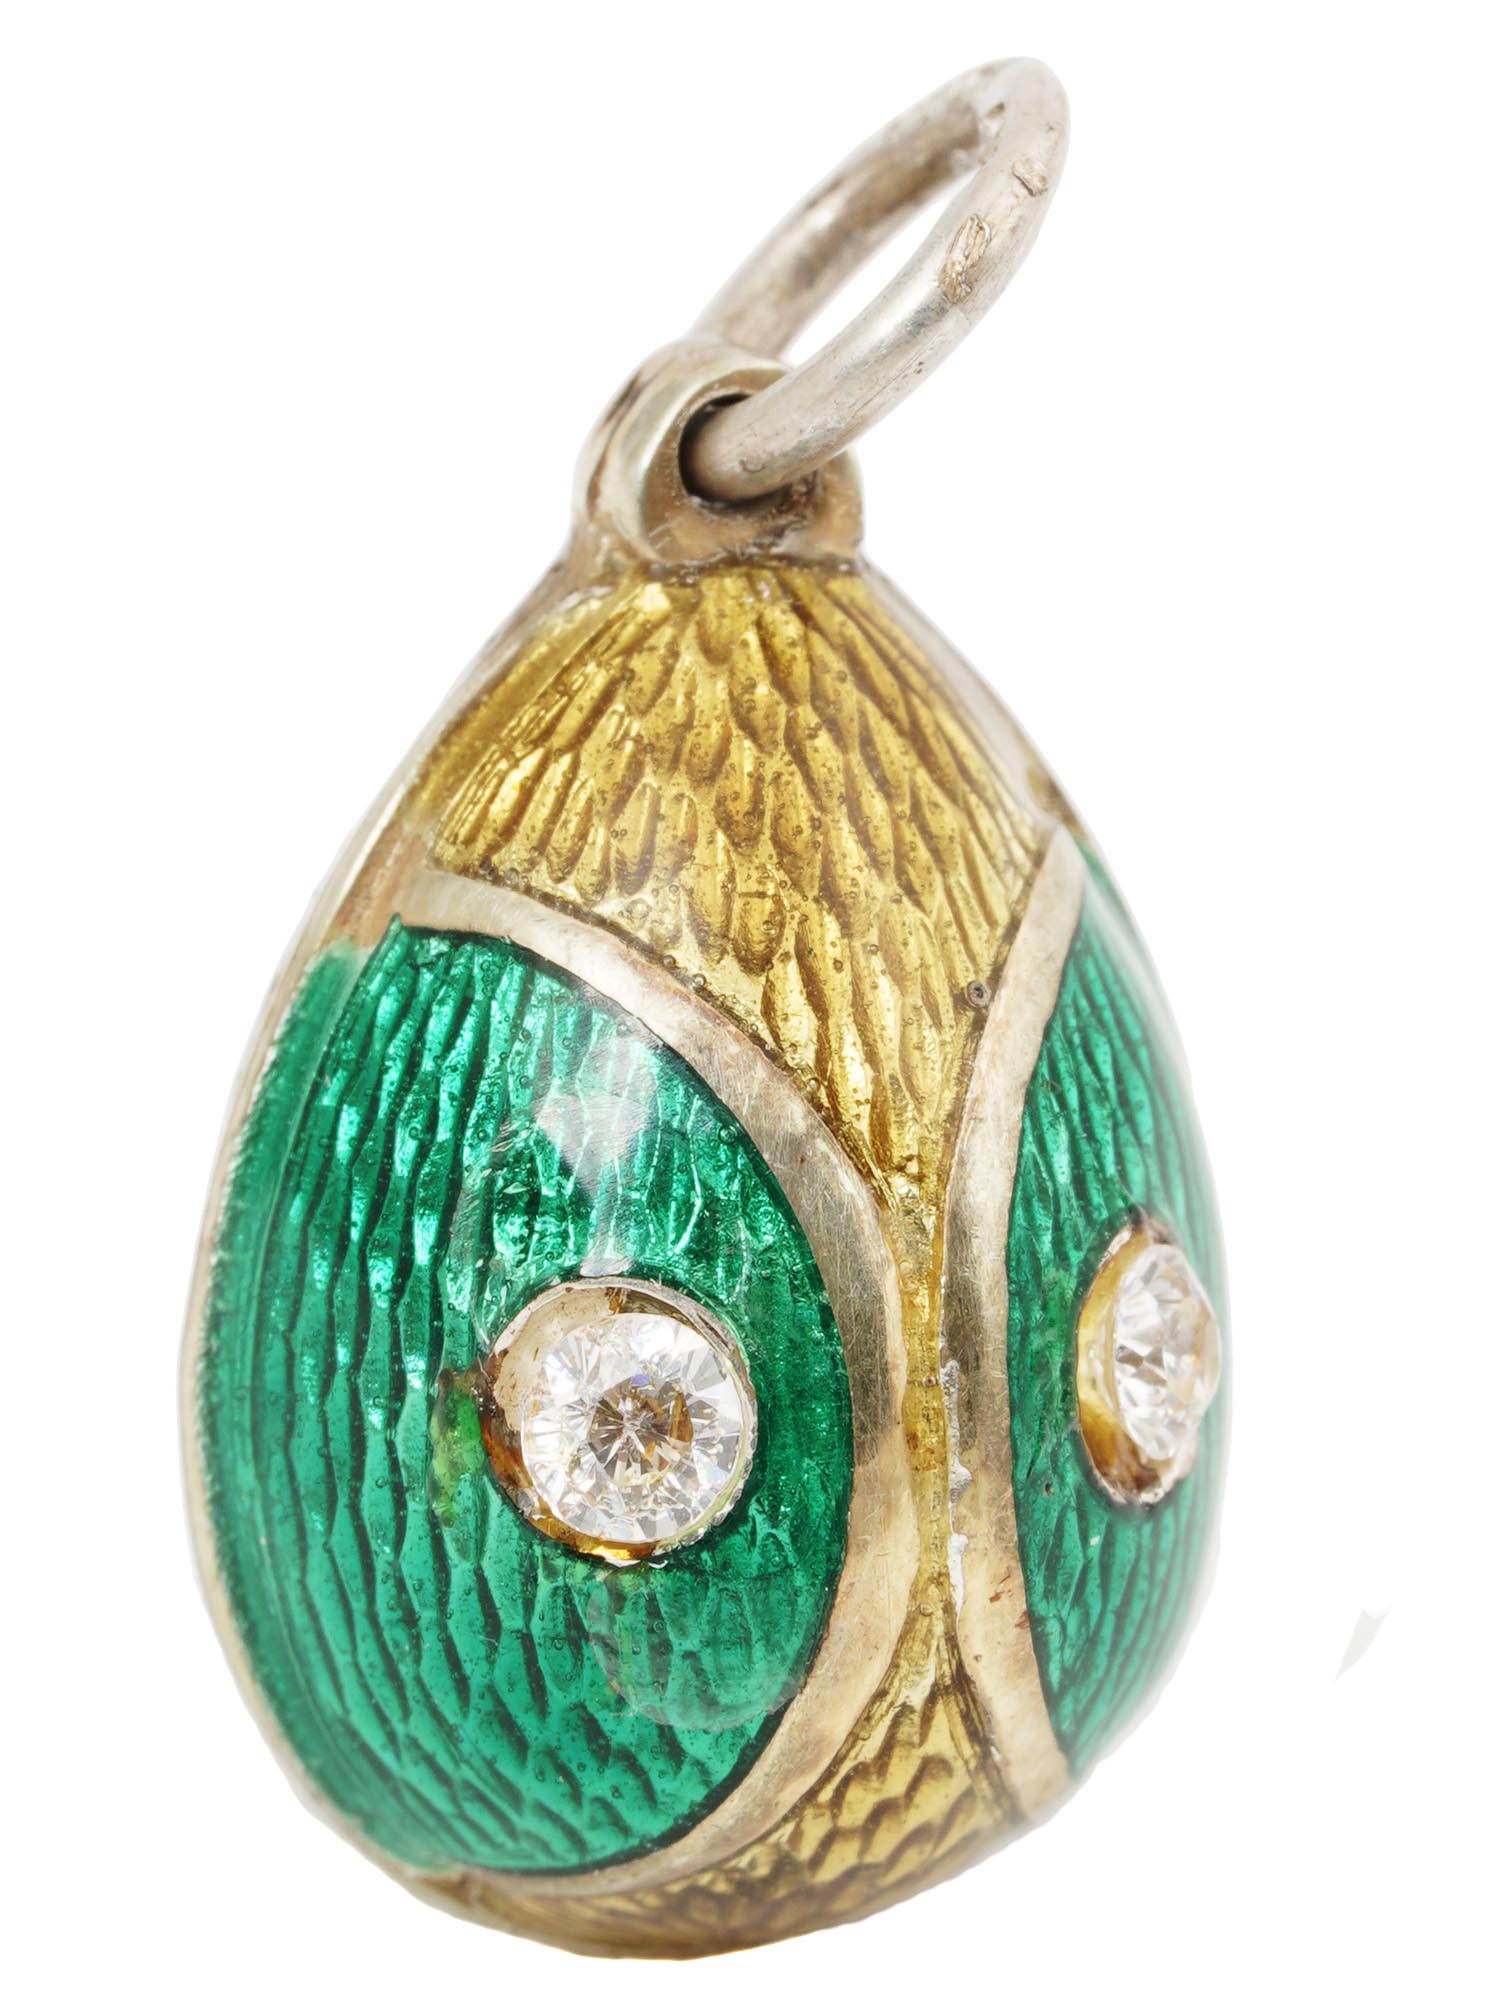 RUSSIAN 84 SILVER AND ENAMEL EASTER EGG PENDANT